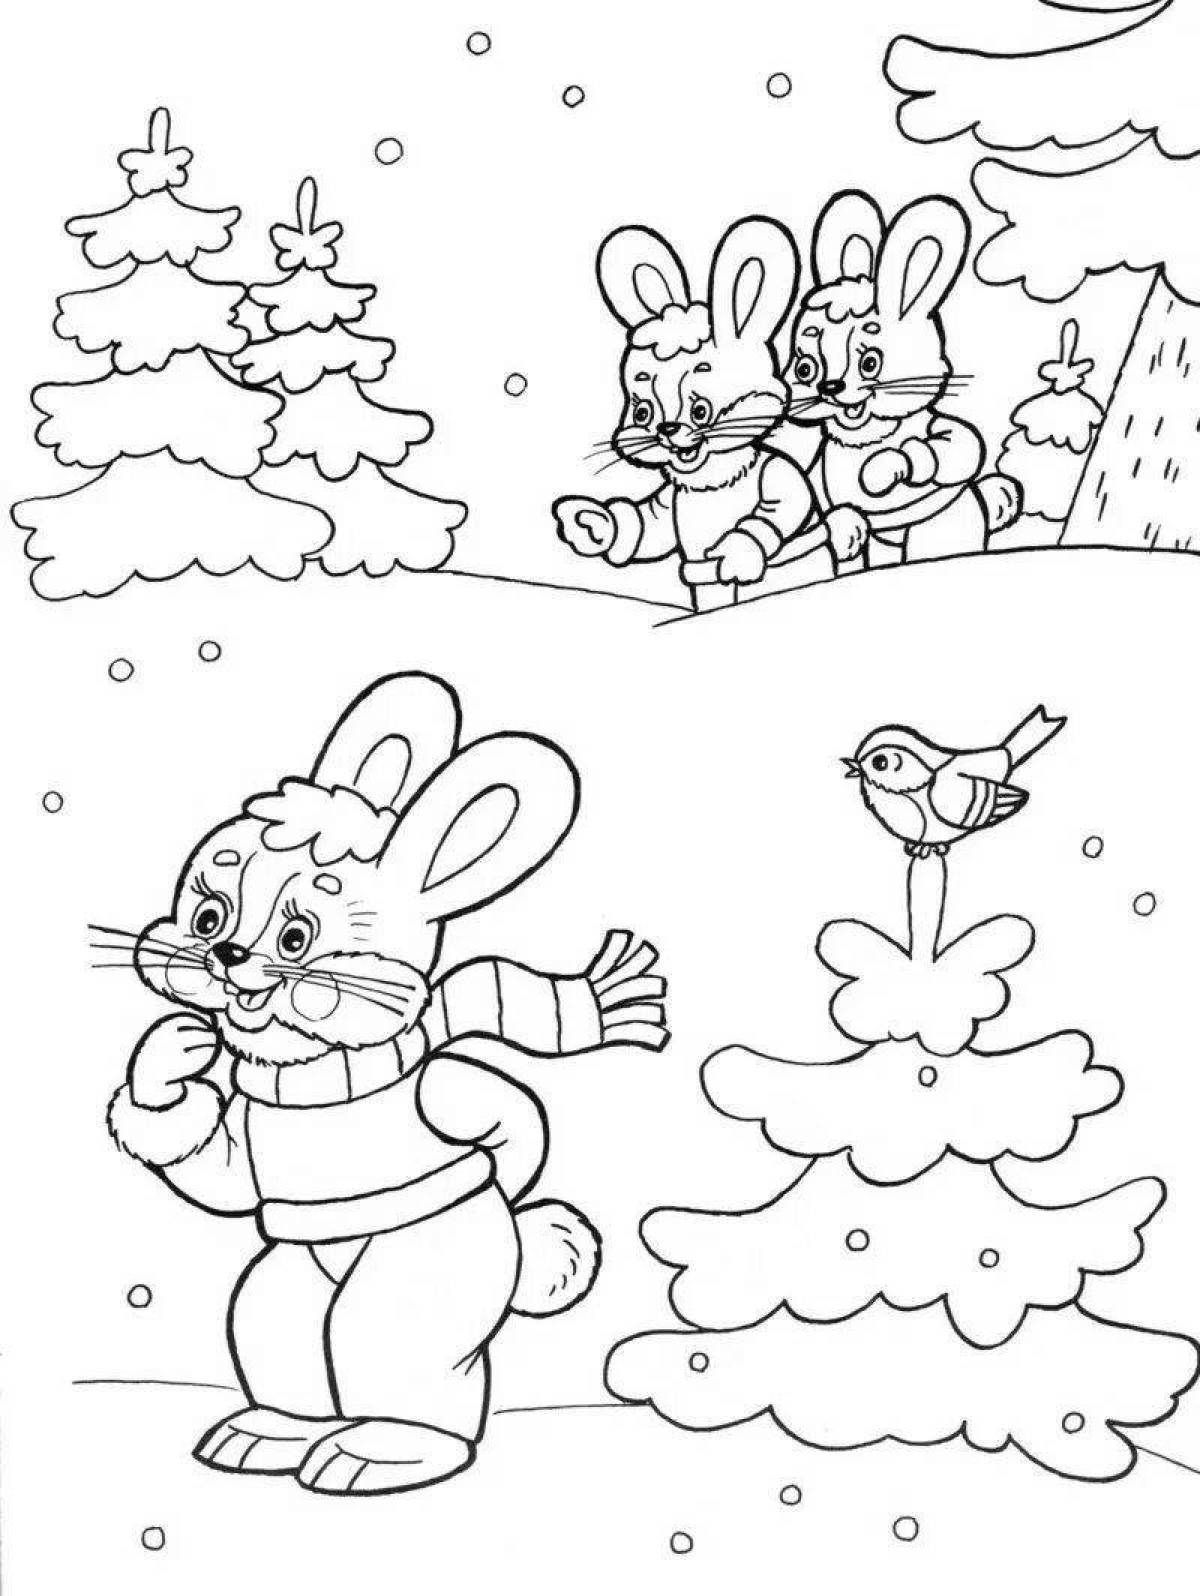 Magic coloring winter for children 2-3 years old